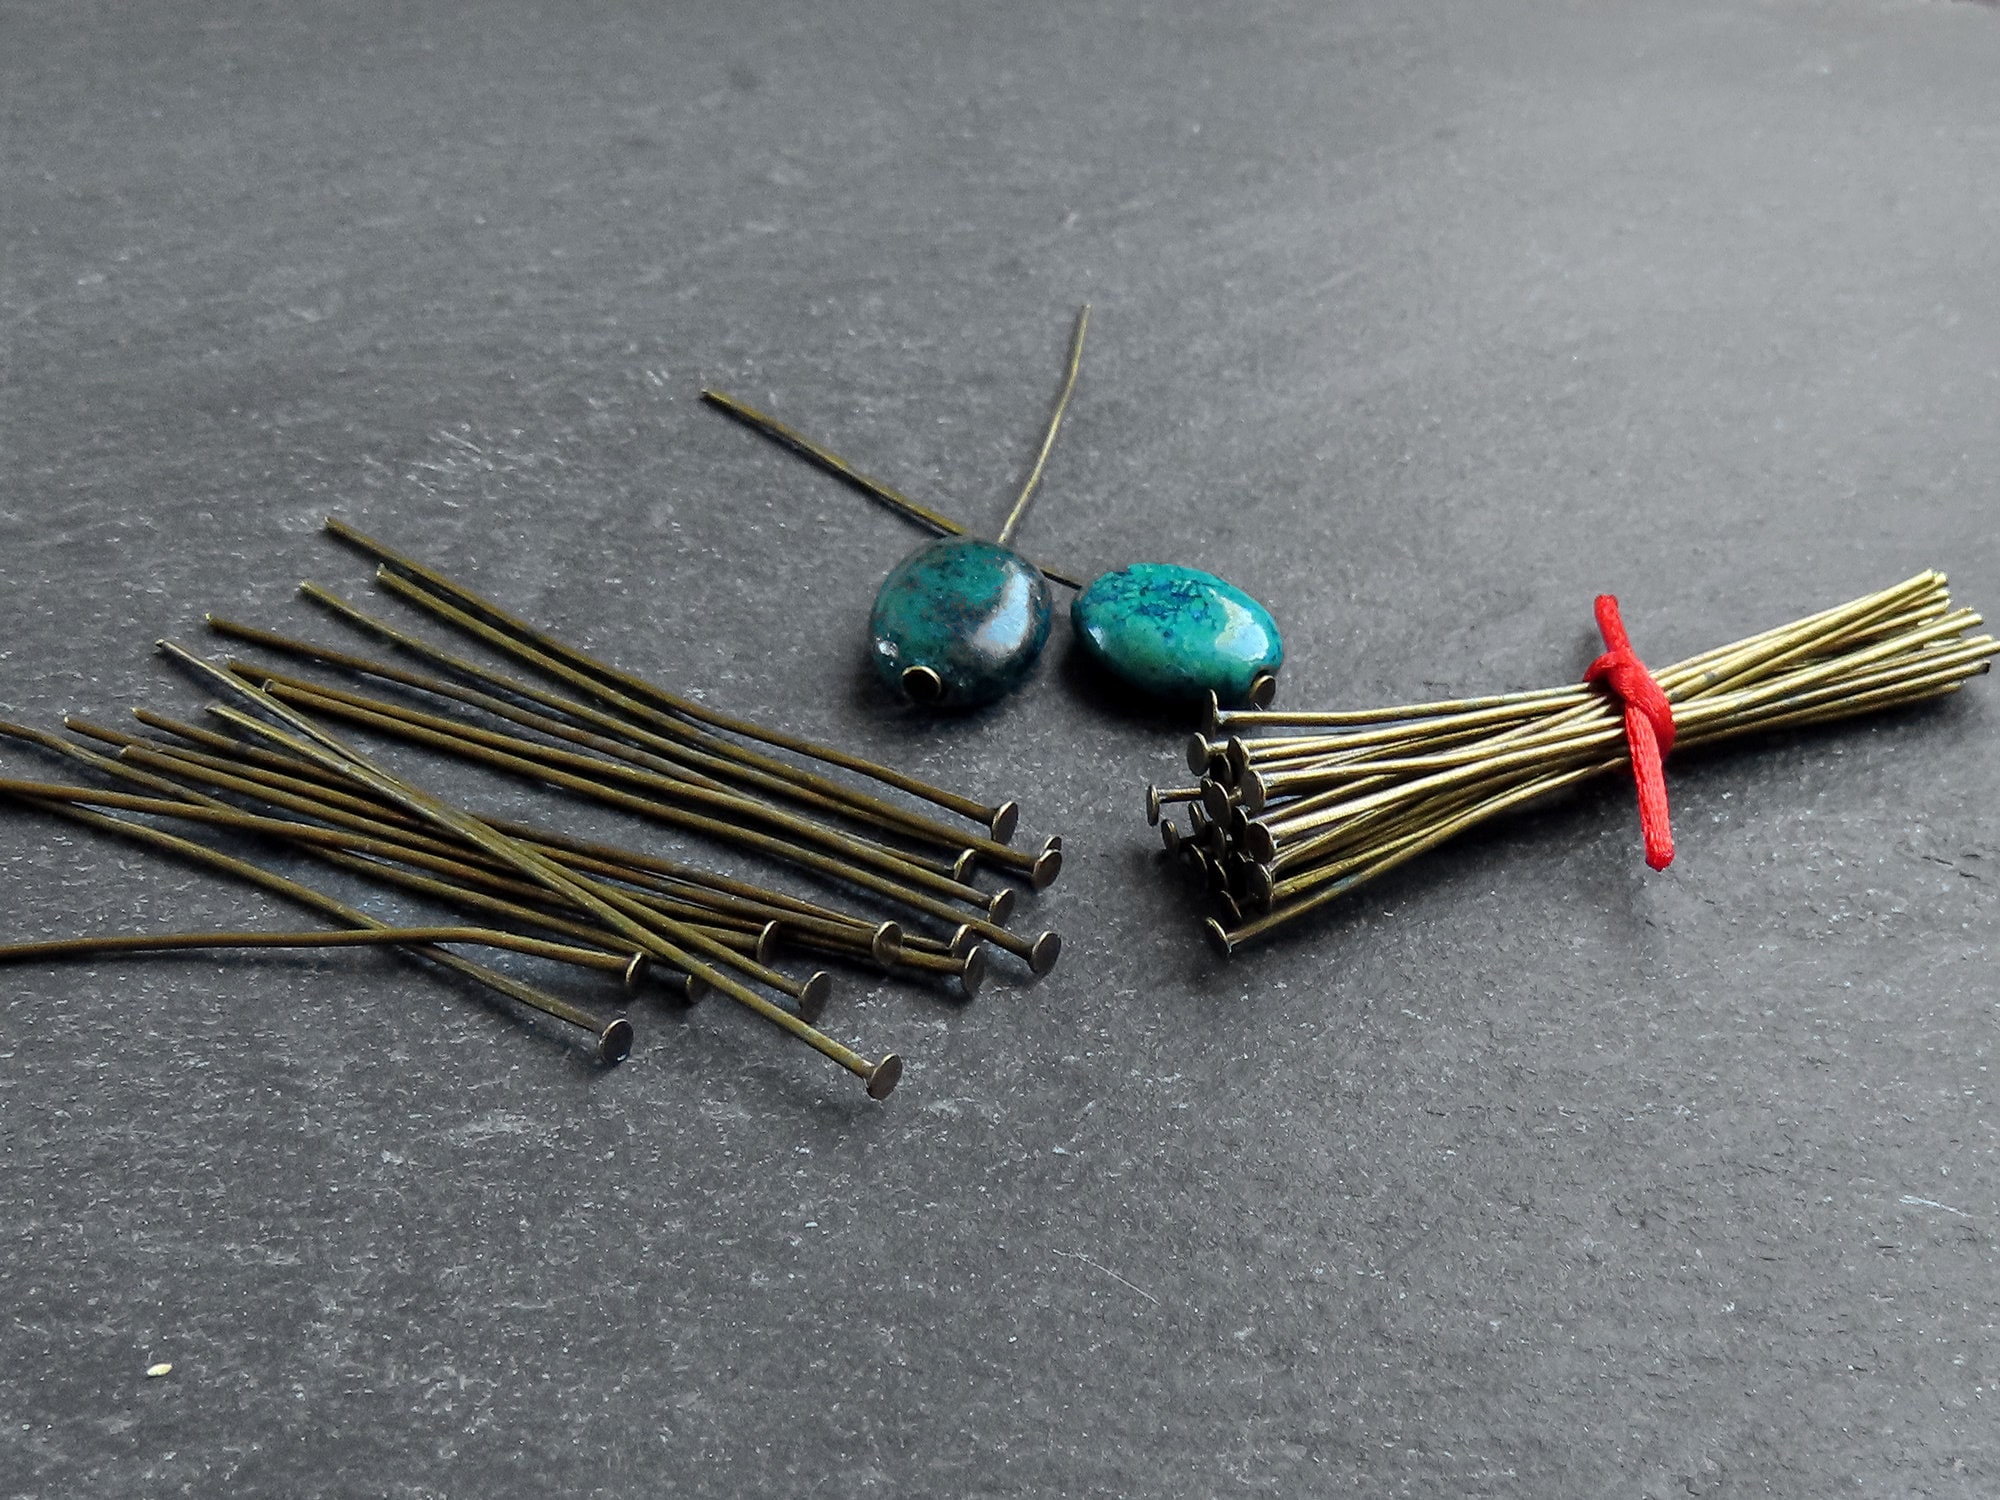 Flat Headpins T Pins 2 Inch 22 Gauge 22G, 1.8mm Head, Jewelry Making,  Antique Bronze Findings, Silver Plated, 100pcs 